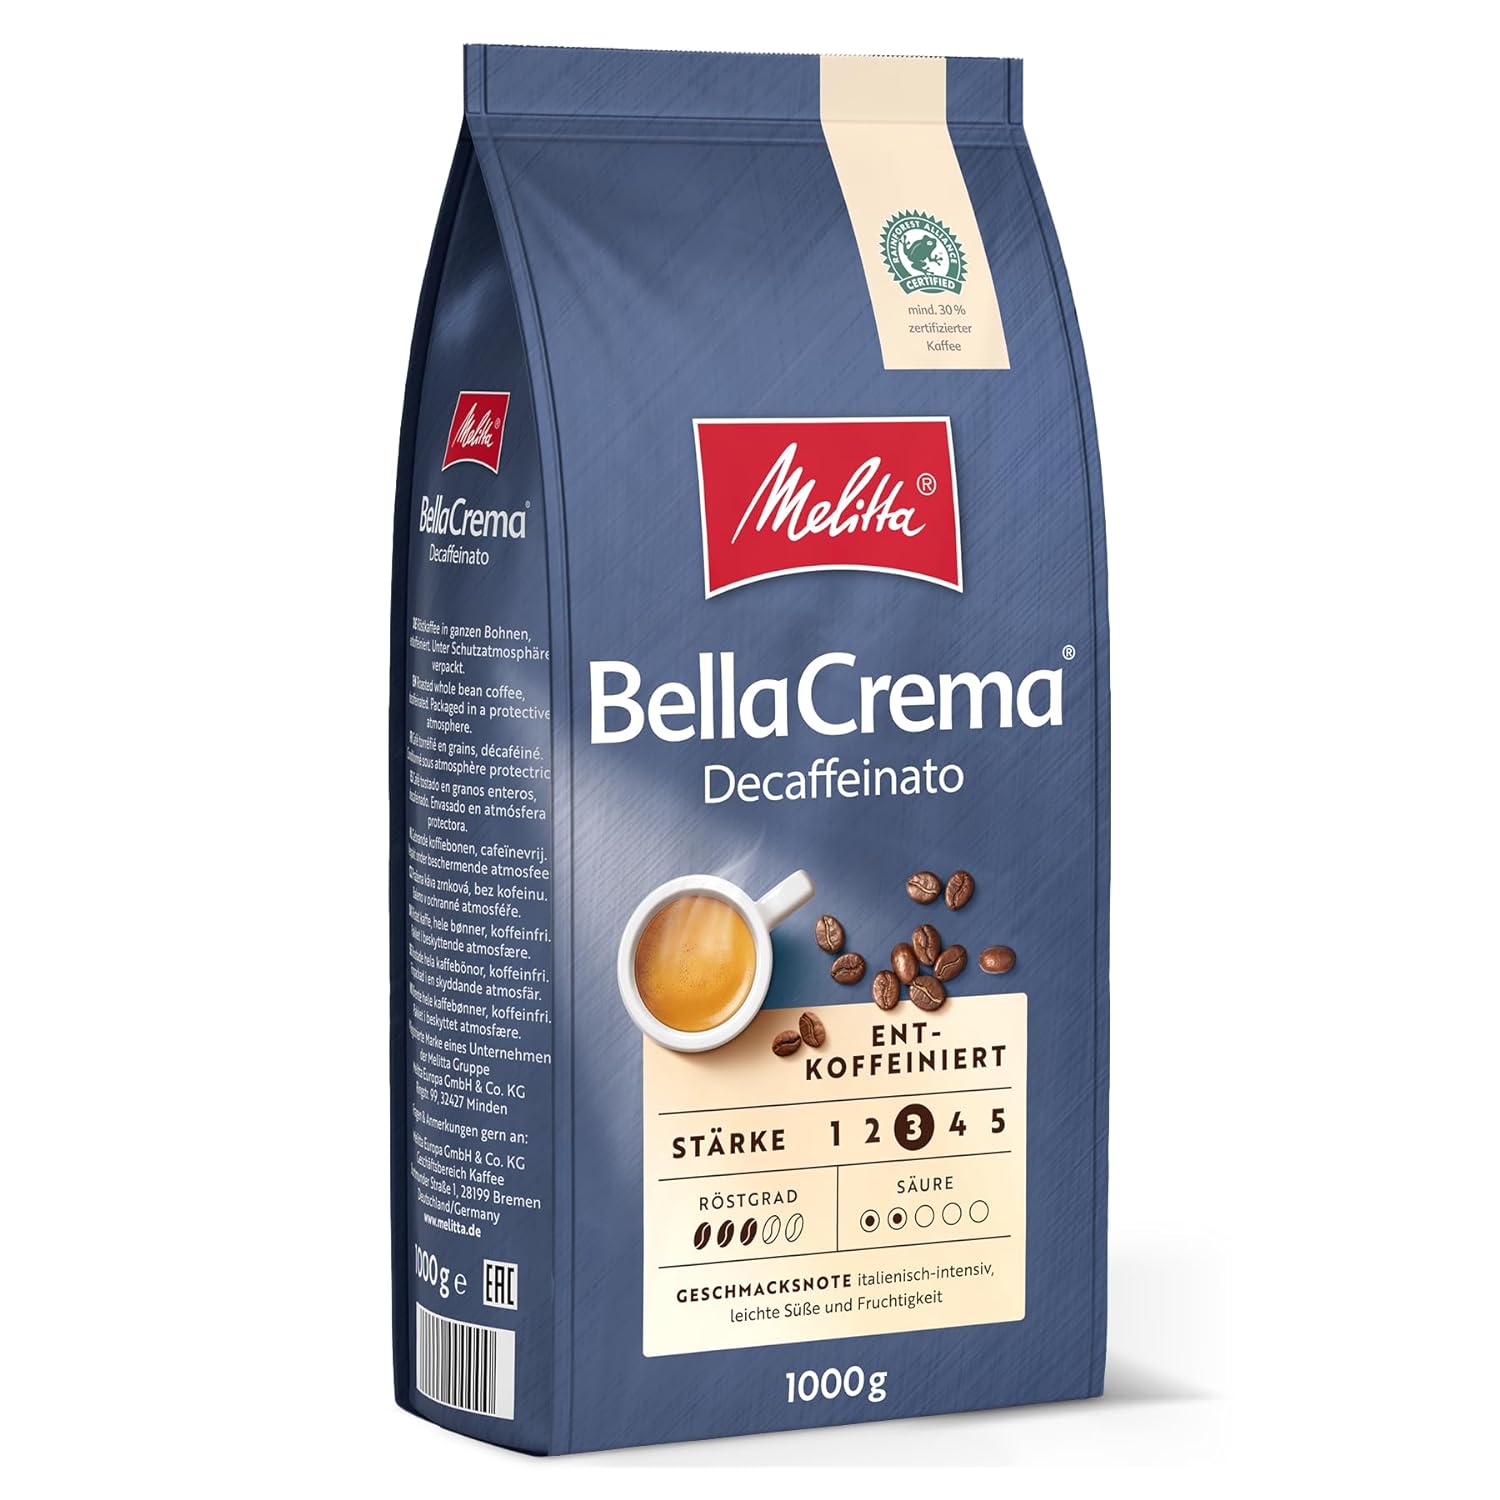 Melitta Bellacrema Decaffeinato entire coffee beans decaffeinated 1kg, uncomfortable, coffee beans for fully automatic coffee machine, caffeine-free, mild roasting, roasted in Germany, strength 3